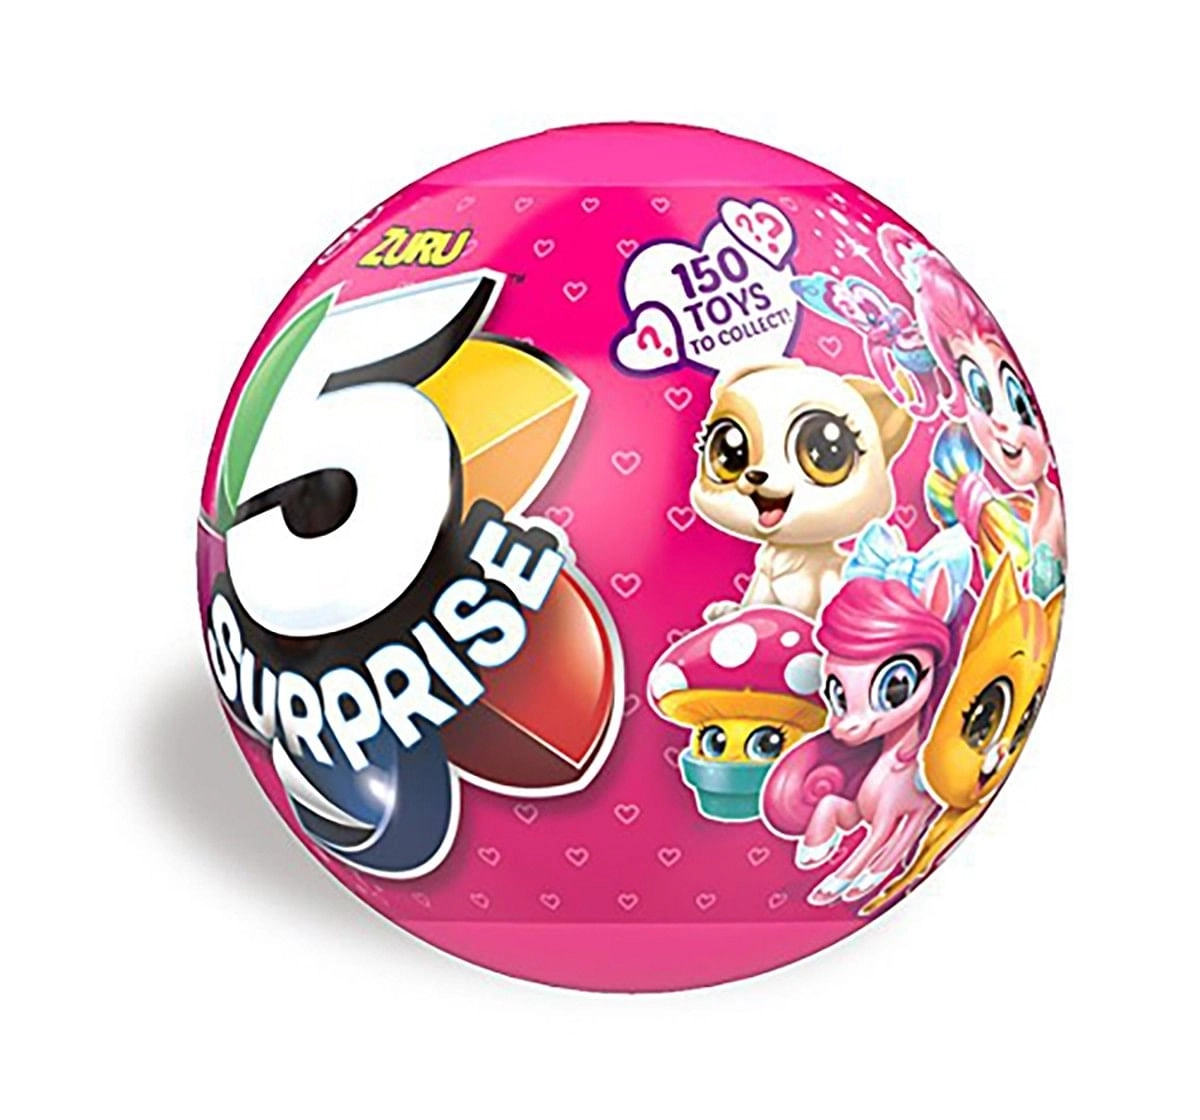  Zuru 5 Surprise Pink Mystery Capsule Collectable Novelty for Kids age 2Y+ 